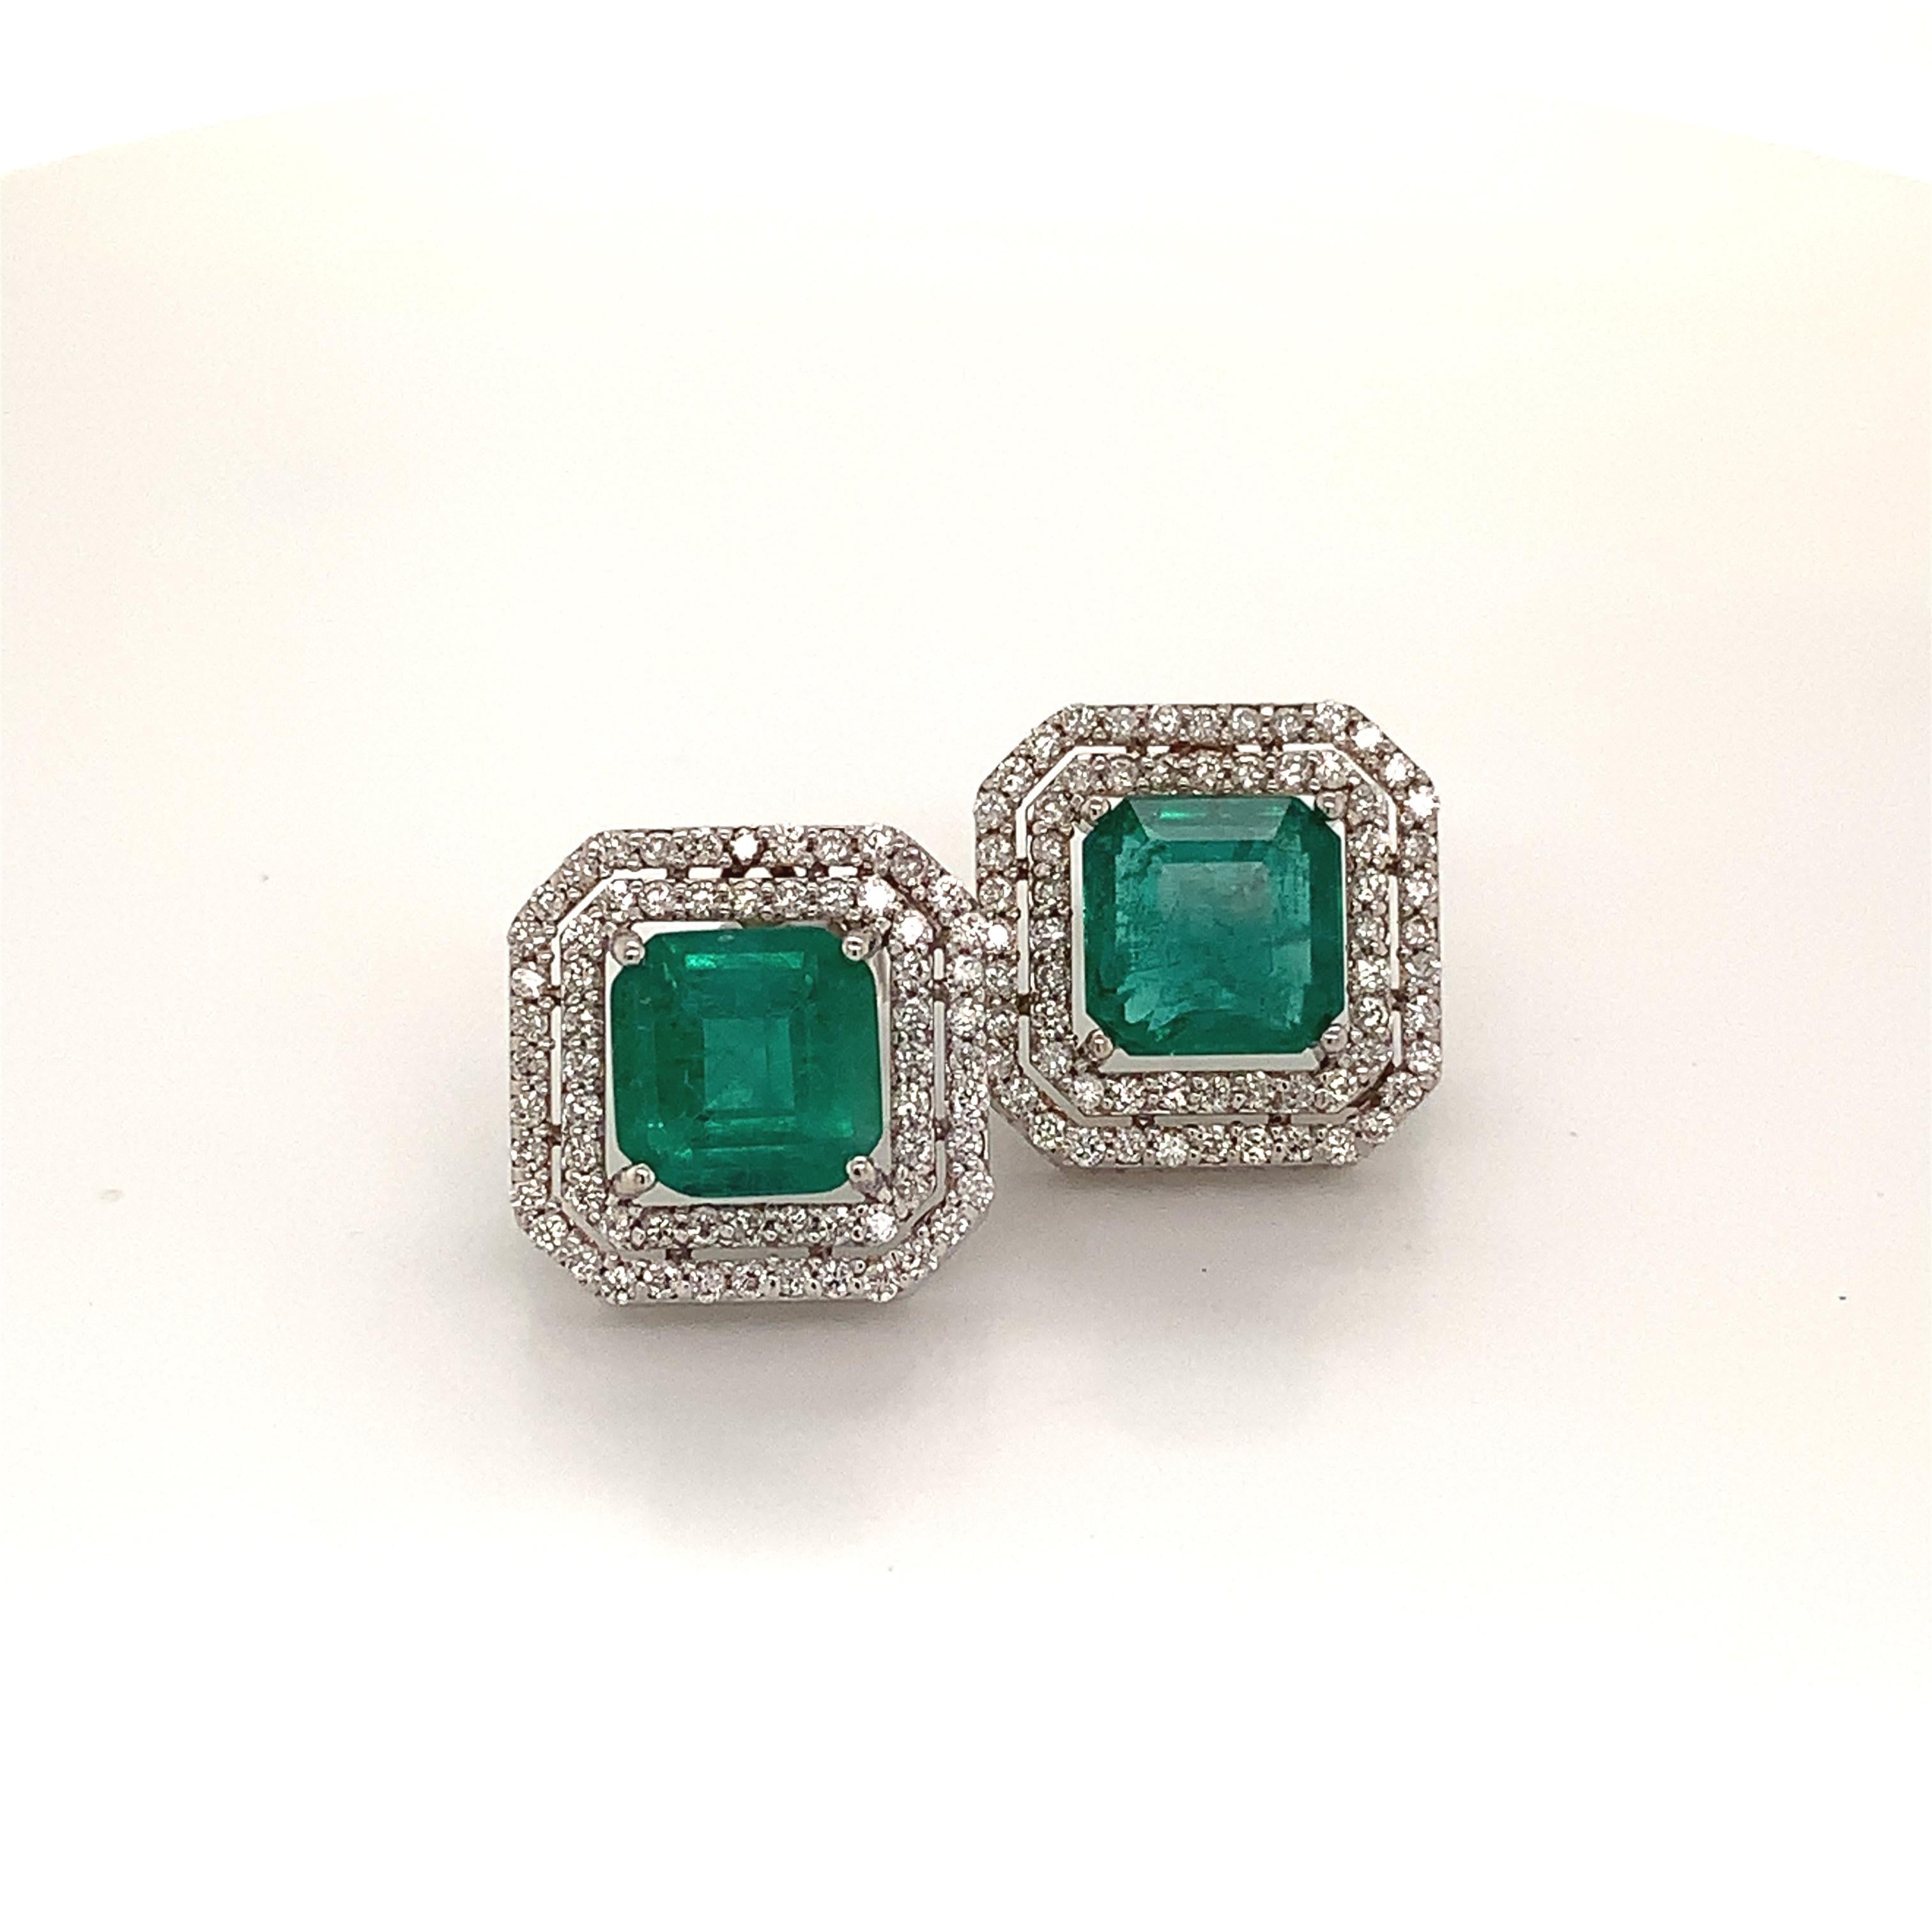 Natural Emerald Diamond Earrings 14k Gold 4.72 Tcw Certified For Sale ...